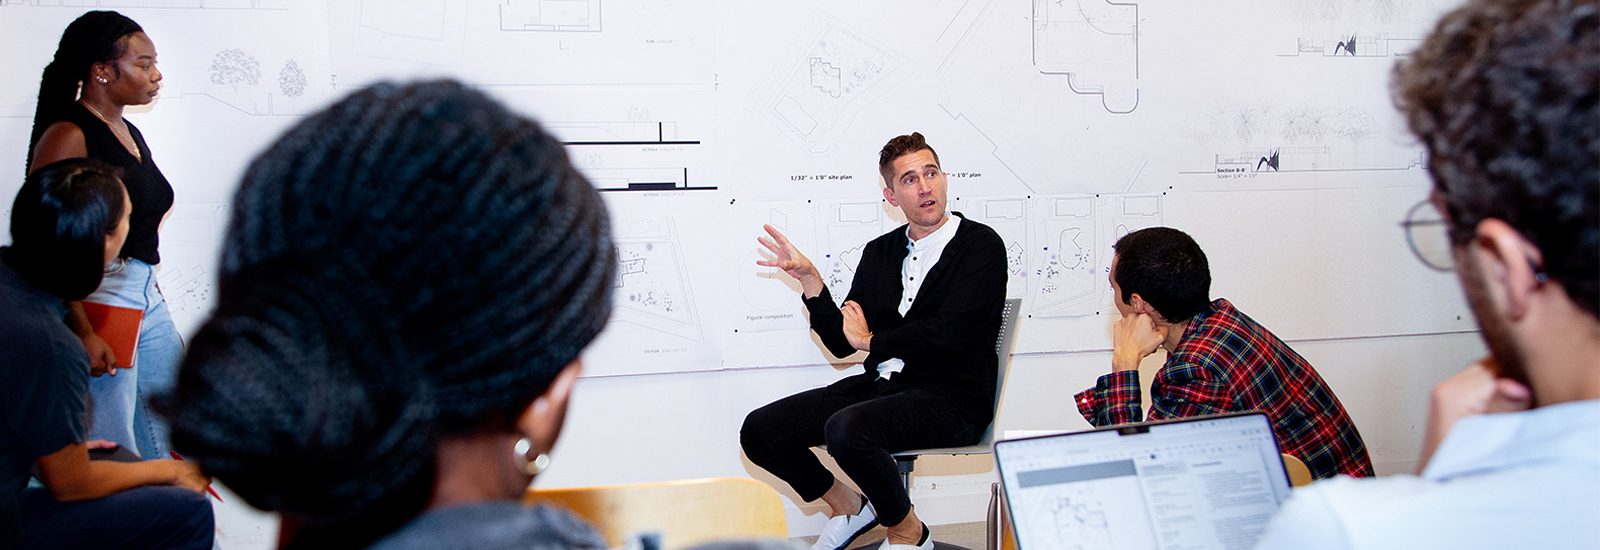 Joel Lamere (center), professor and director of the graduate program in the School of Architecture, conducts a review of first year graduate students' first project of the semester in the Thomas P. Murphy Design Studio Building. Photo: Joshua Prezant/University of Miami